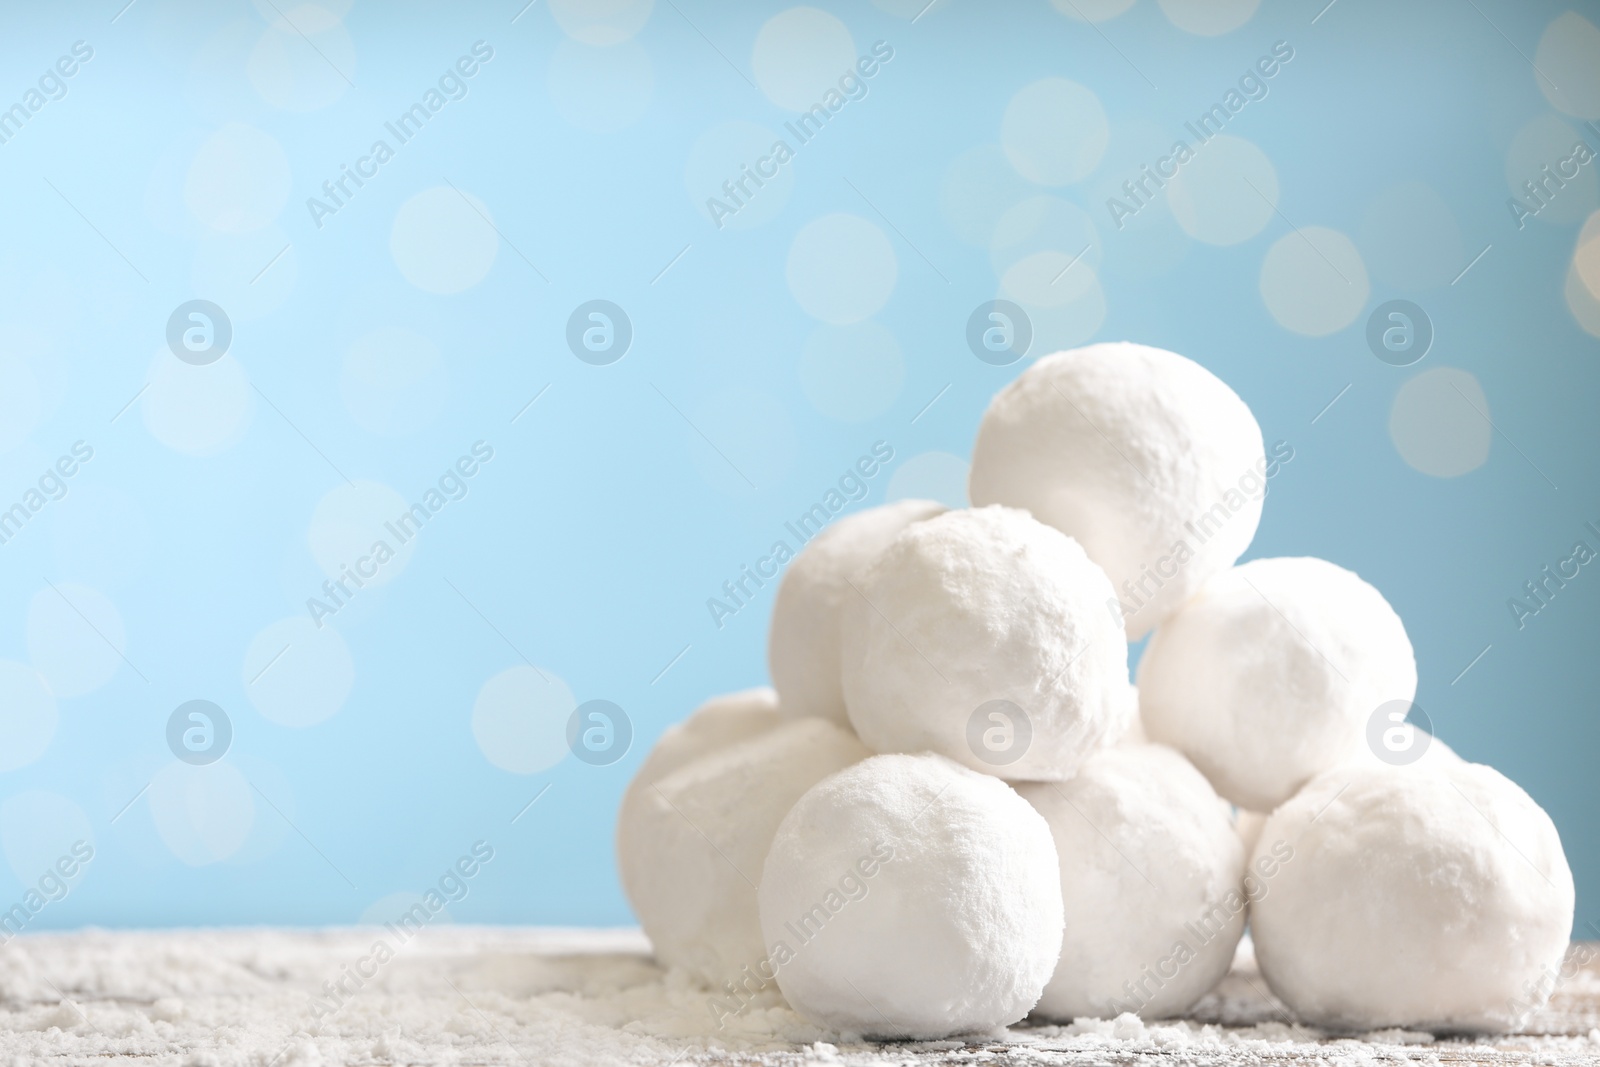 Photo of Snowballs on table against blurred lights, space for text